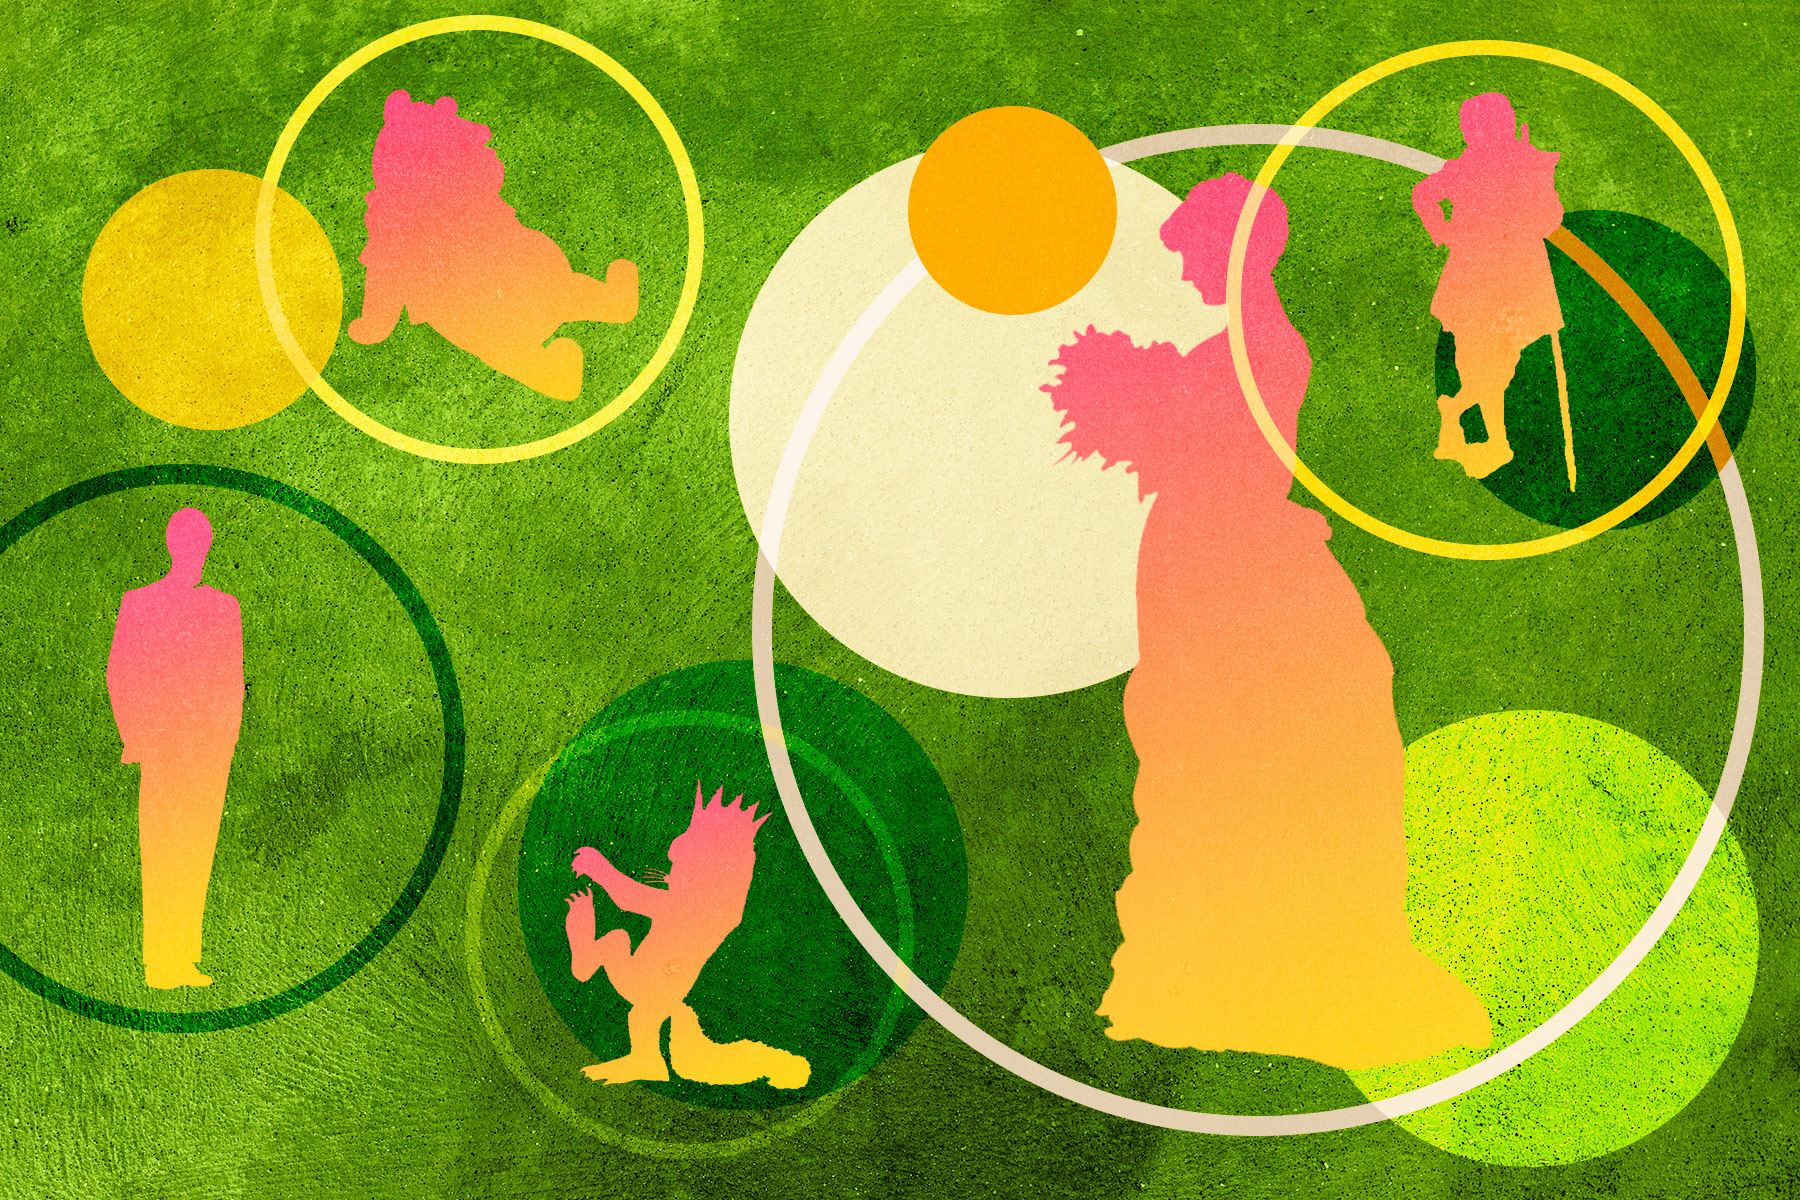 An illustration of five literary characters' silhouettes against a green-grass background